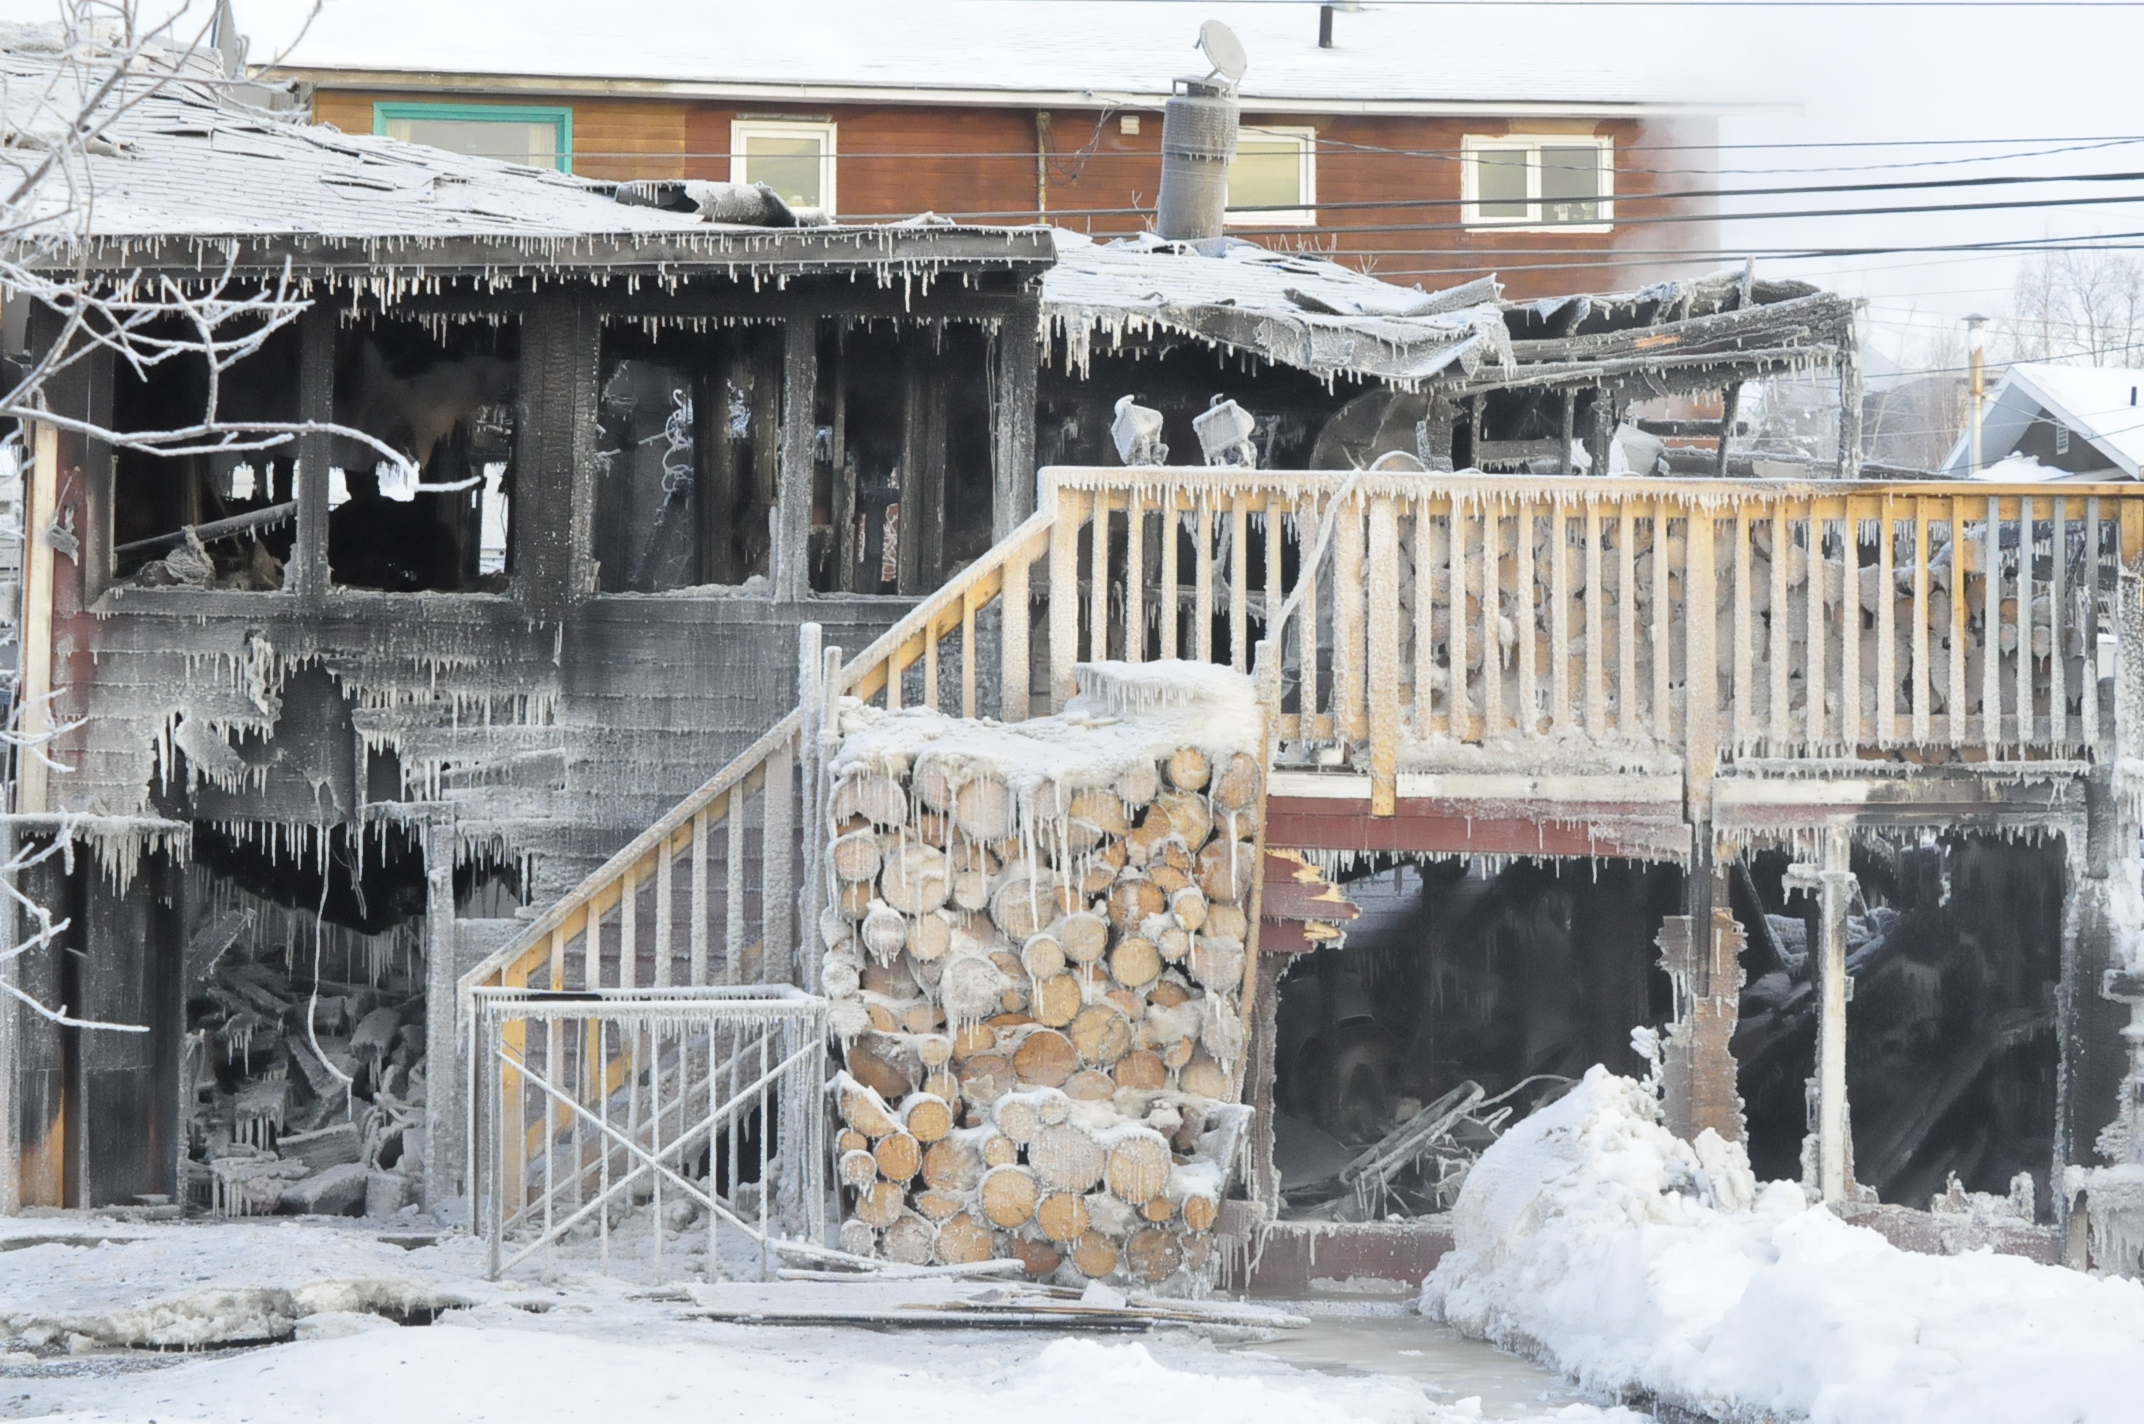 After the house fire: Frozen and burned | Life in Inuvik, Northwest ...